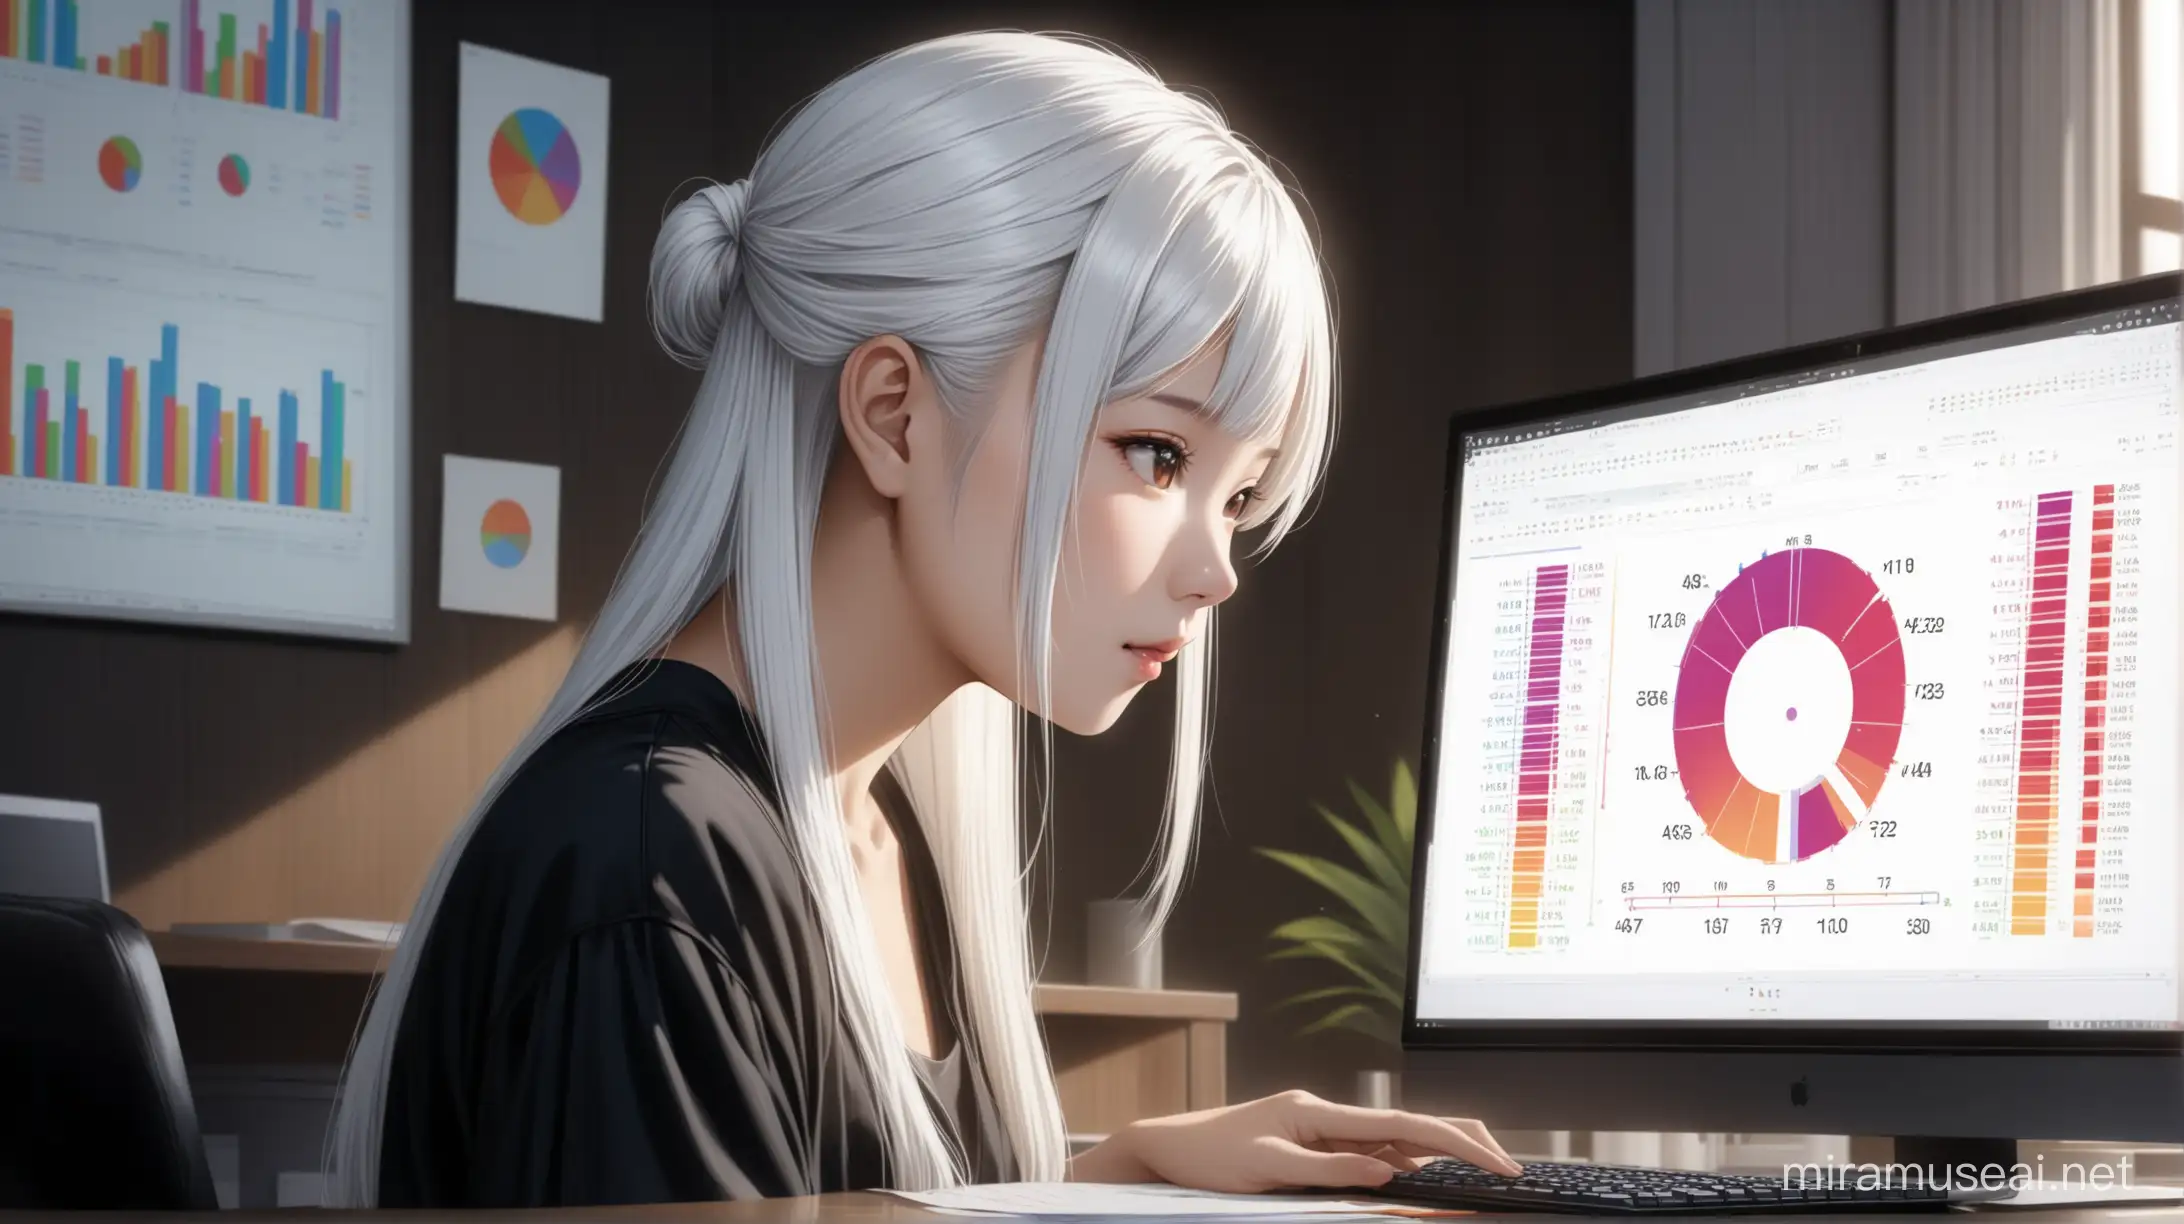 Asian Girl with Kare Hairstyle Analyzing Data on Home Computer in Realistic 4K